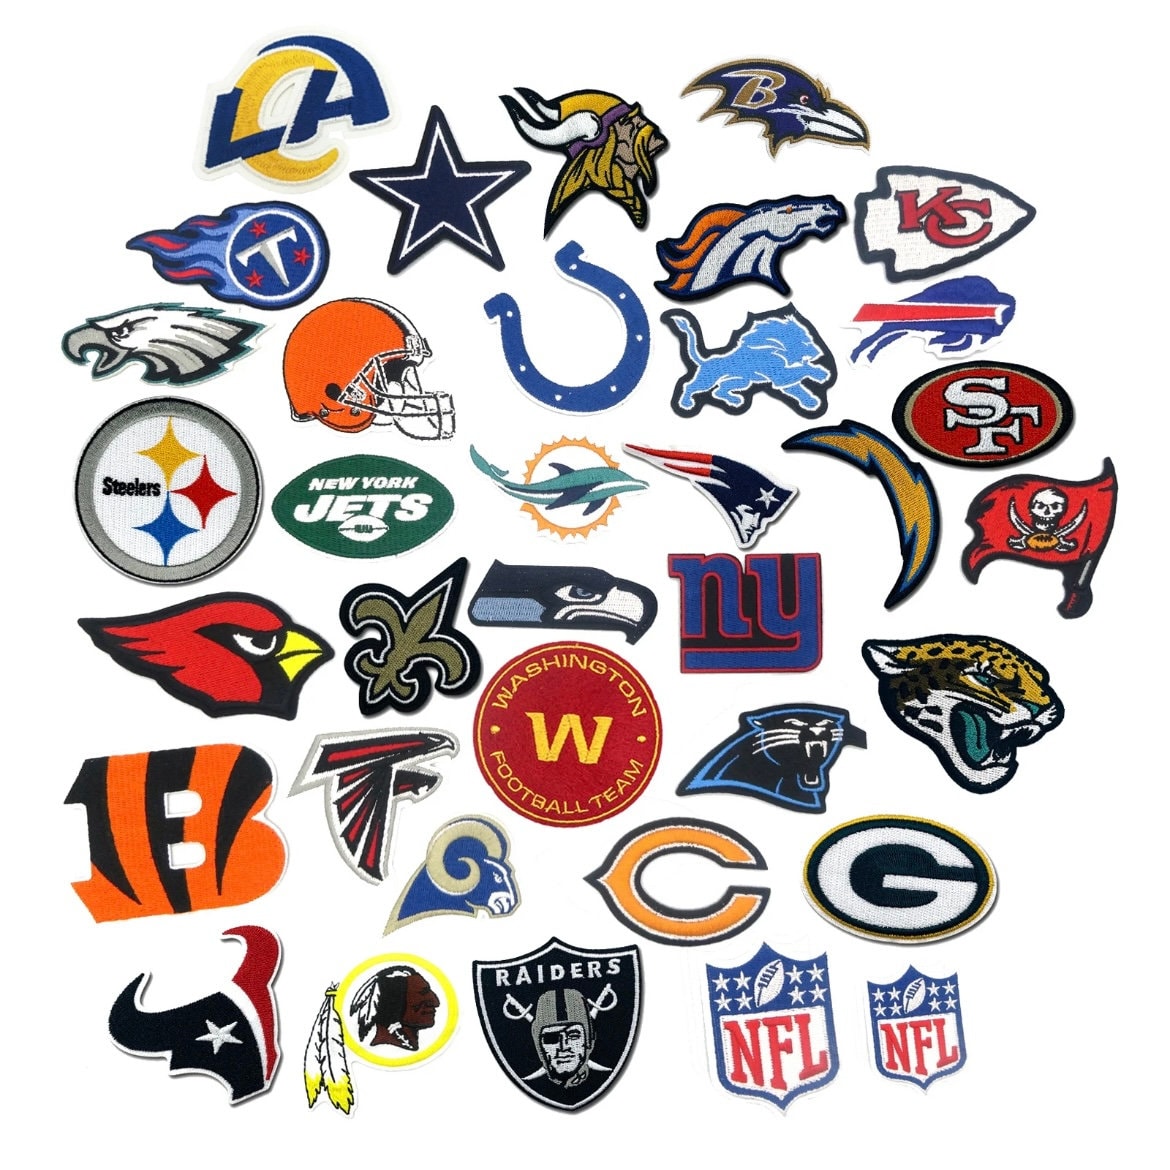 All 32 NFL, National Football League Teams Logo embroidered iron on patch  lot.